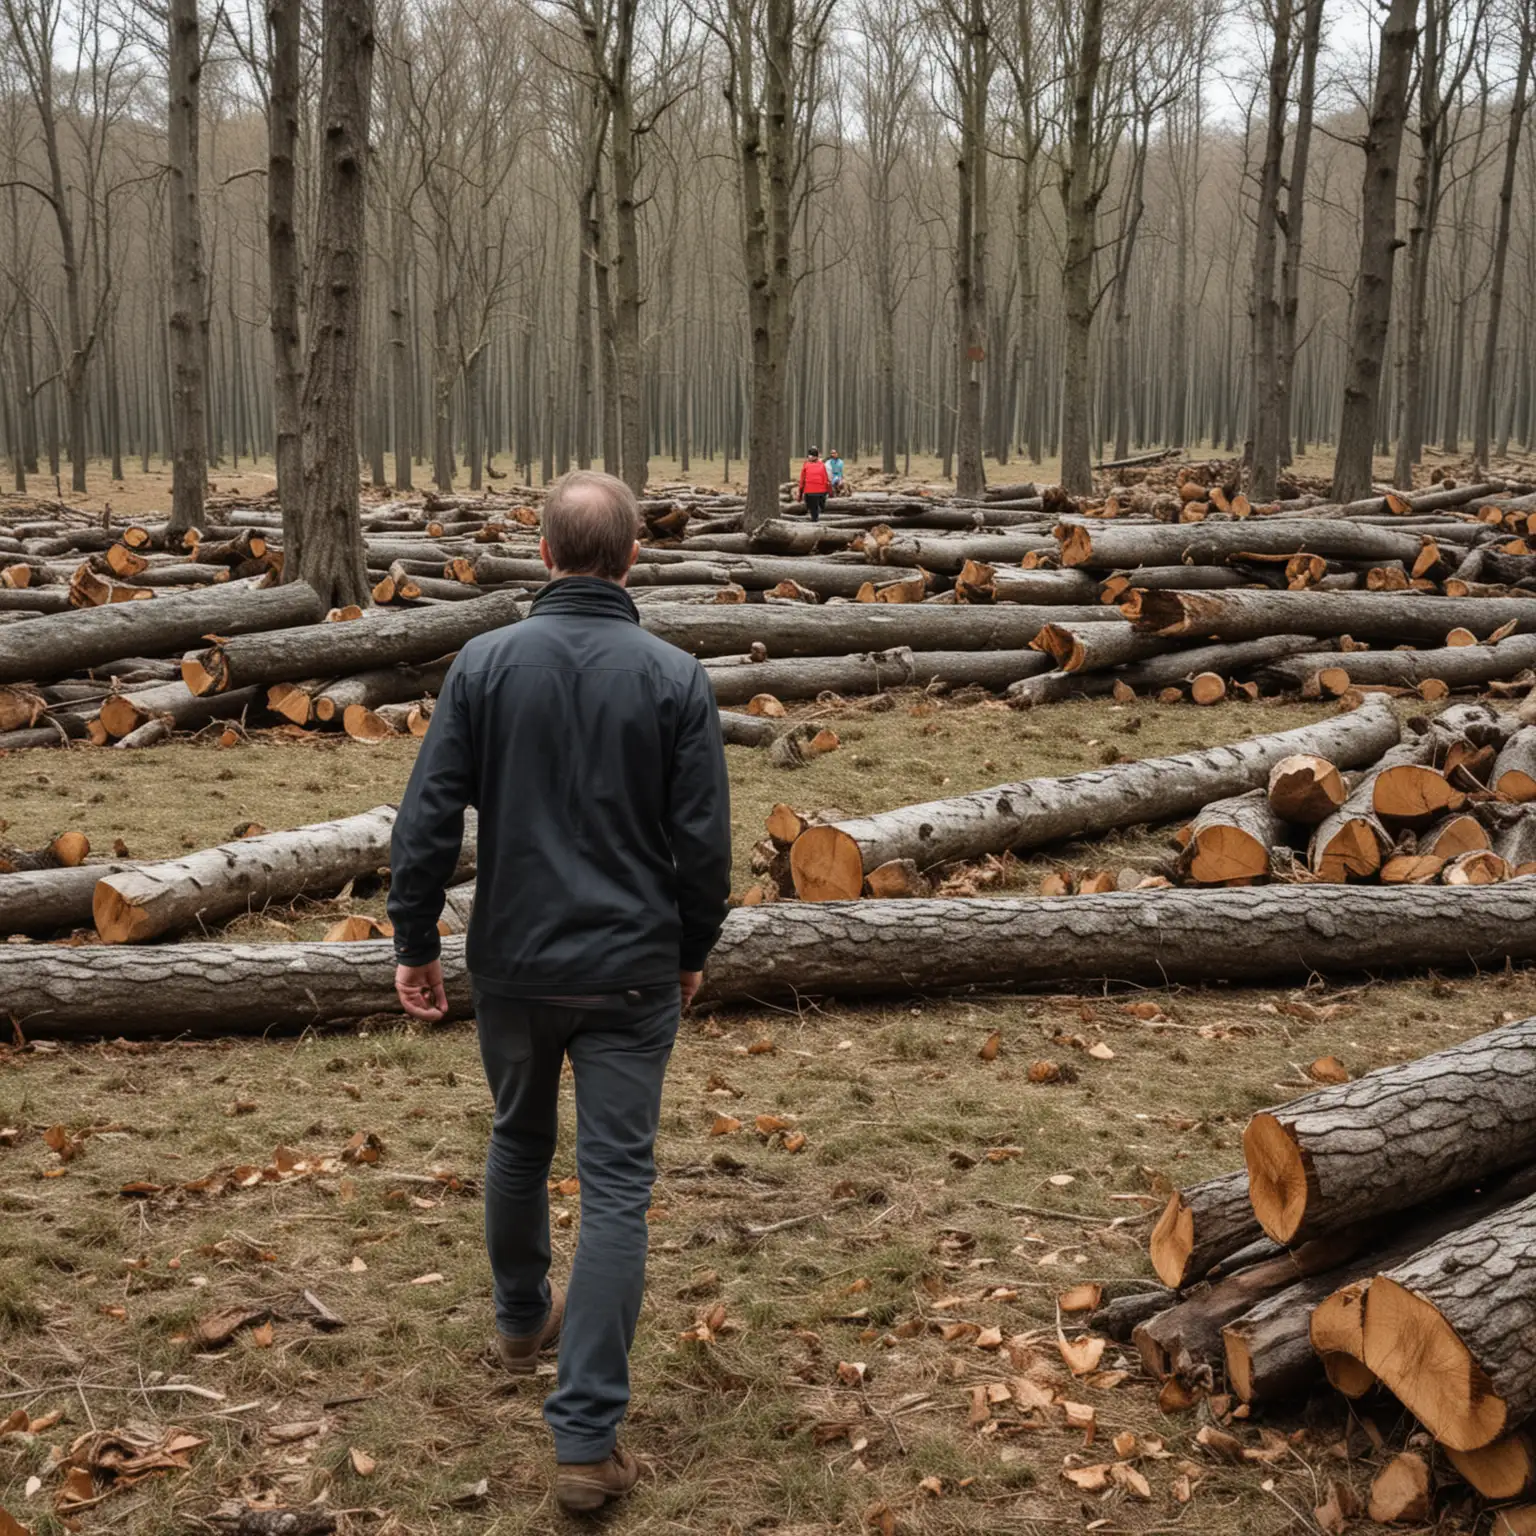 a man in close up, in the background A football field in a an old oak forest, piles of cut trees, people walking around